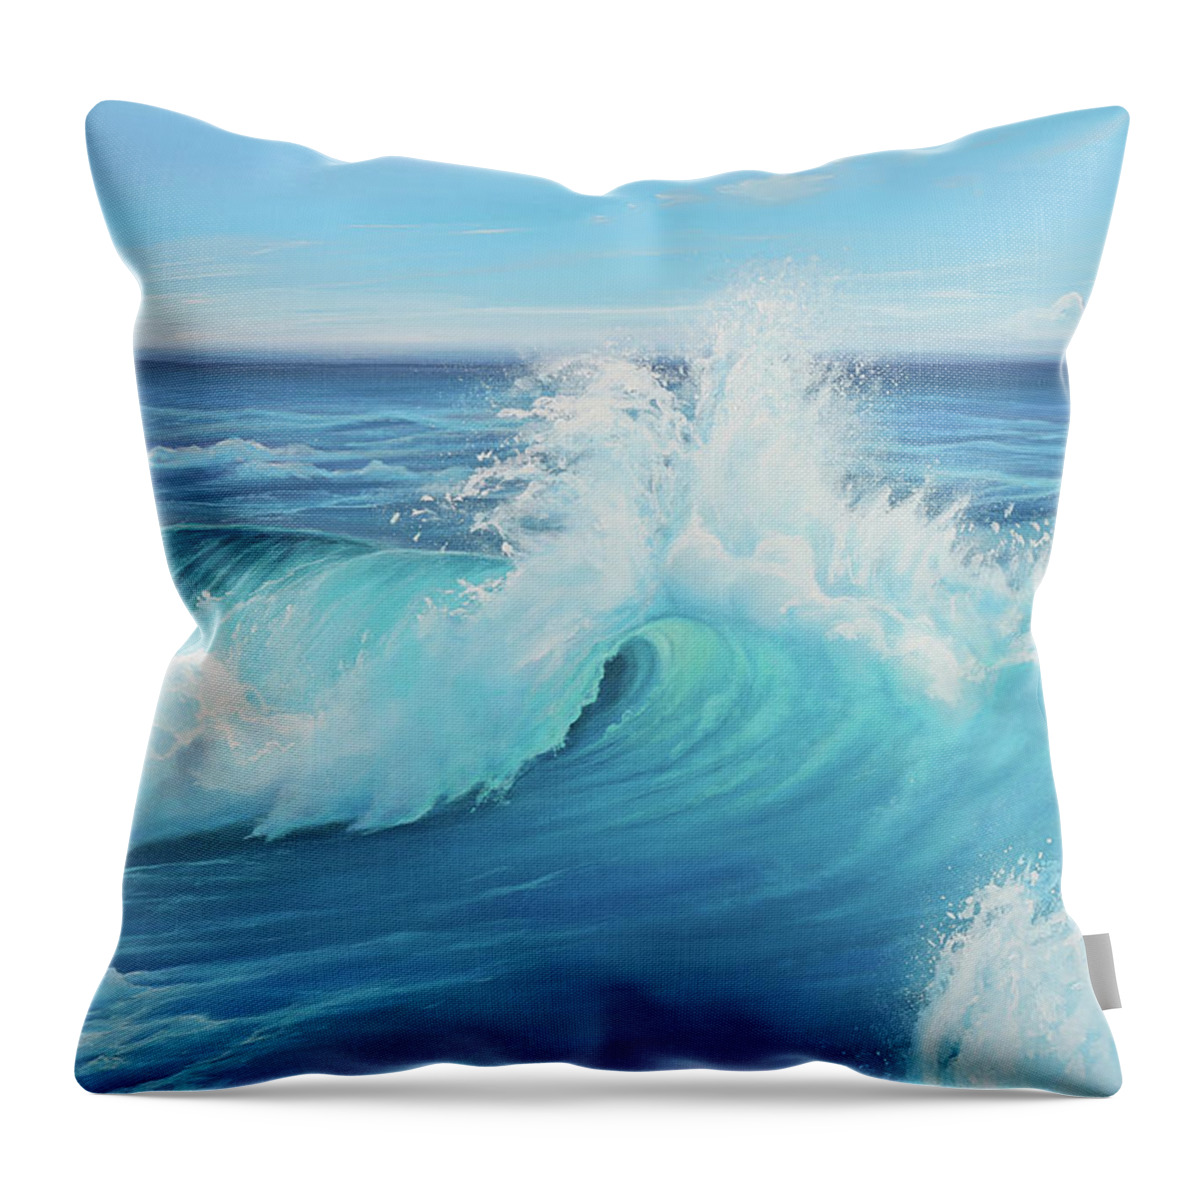 Seascape Throw Pillow featuring the painting Eye of the Ocean by Joe Mandrick